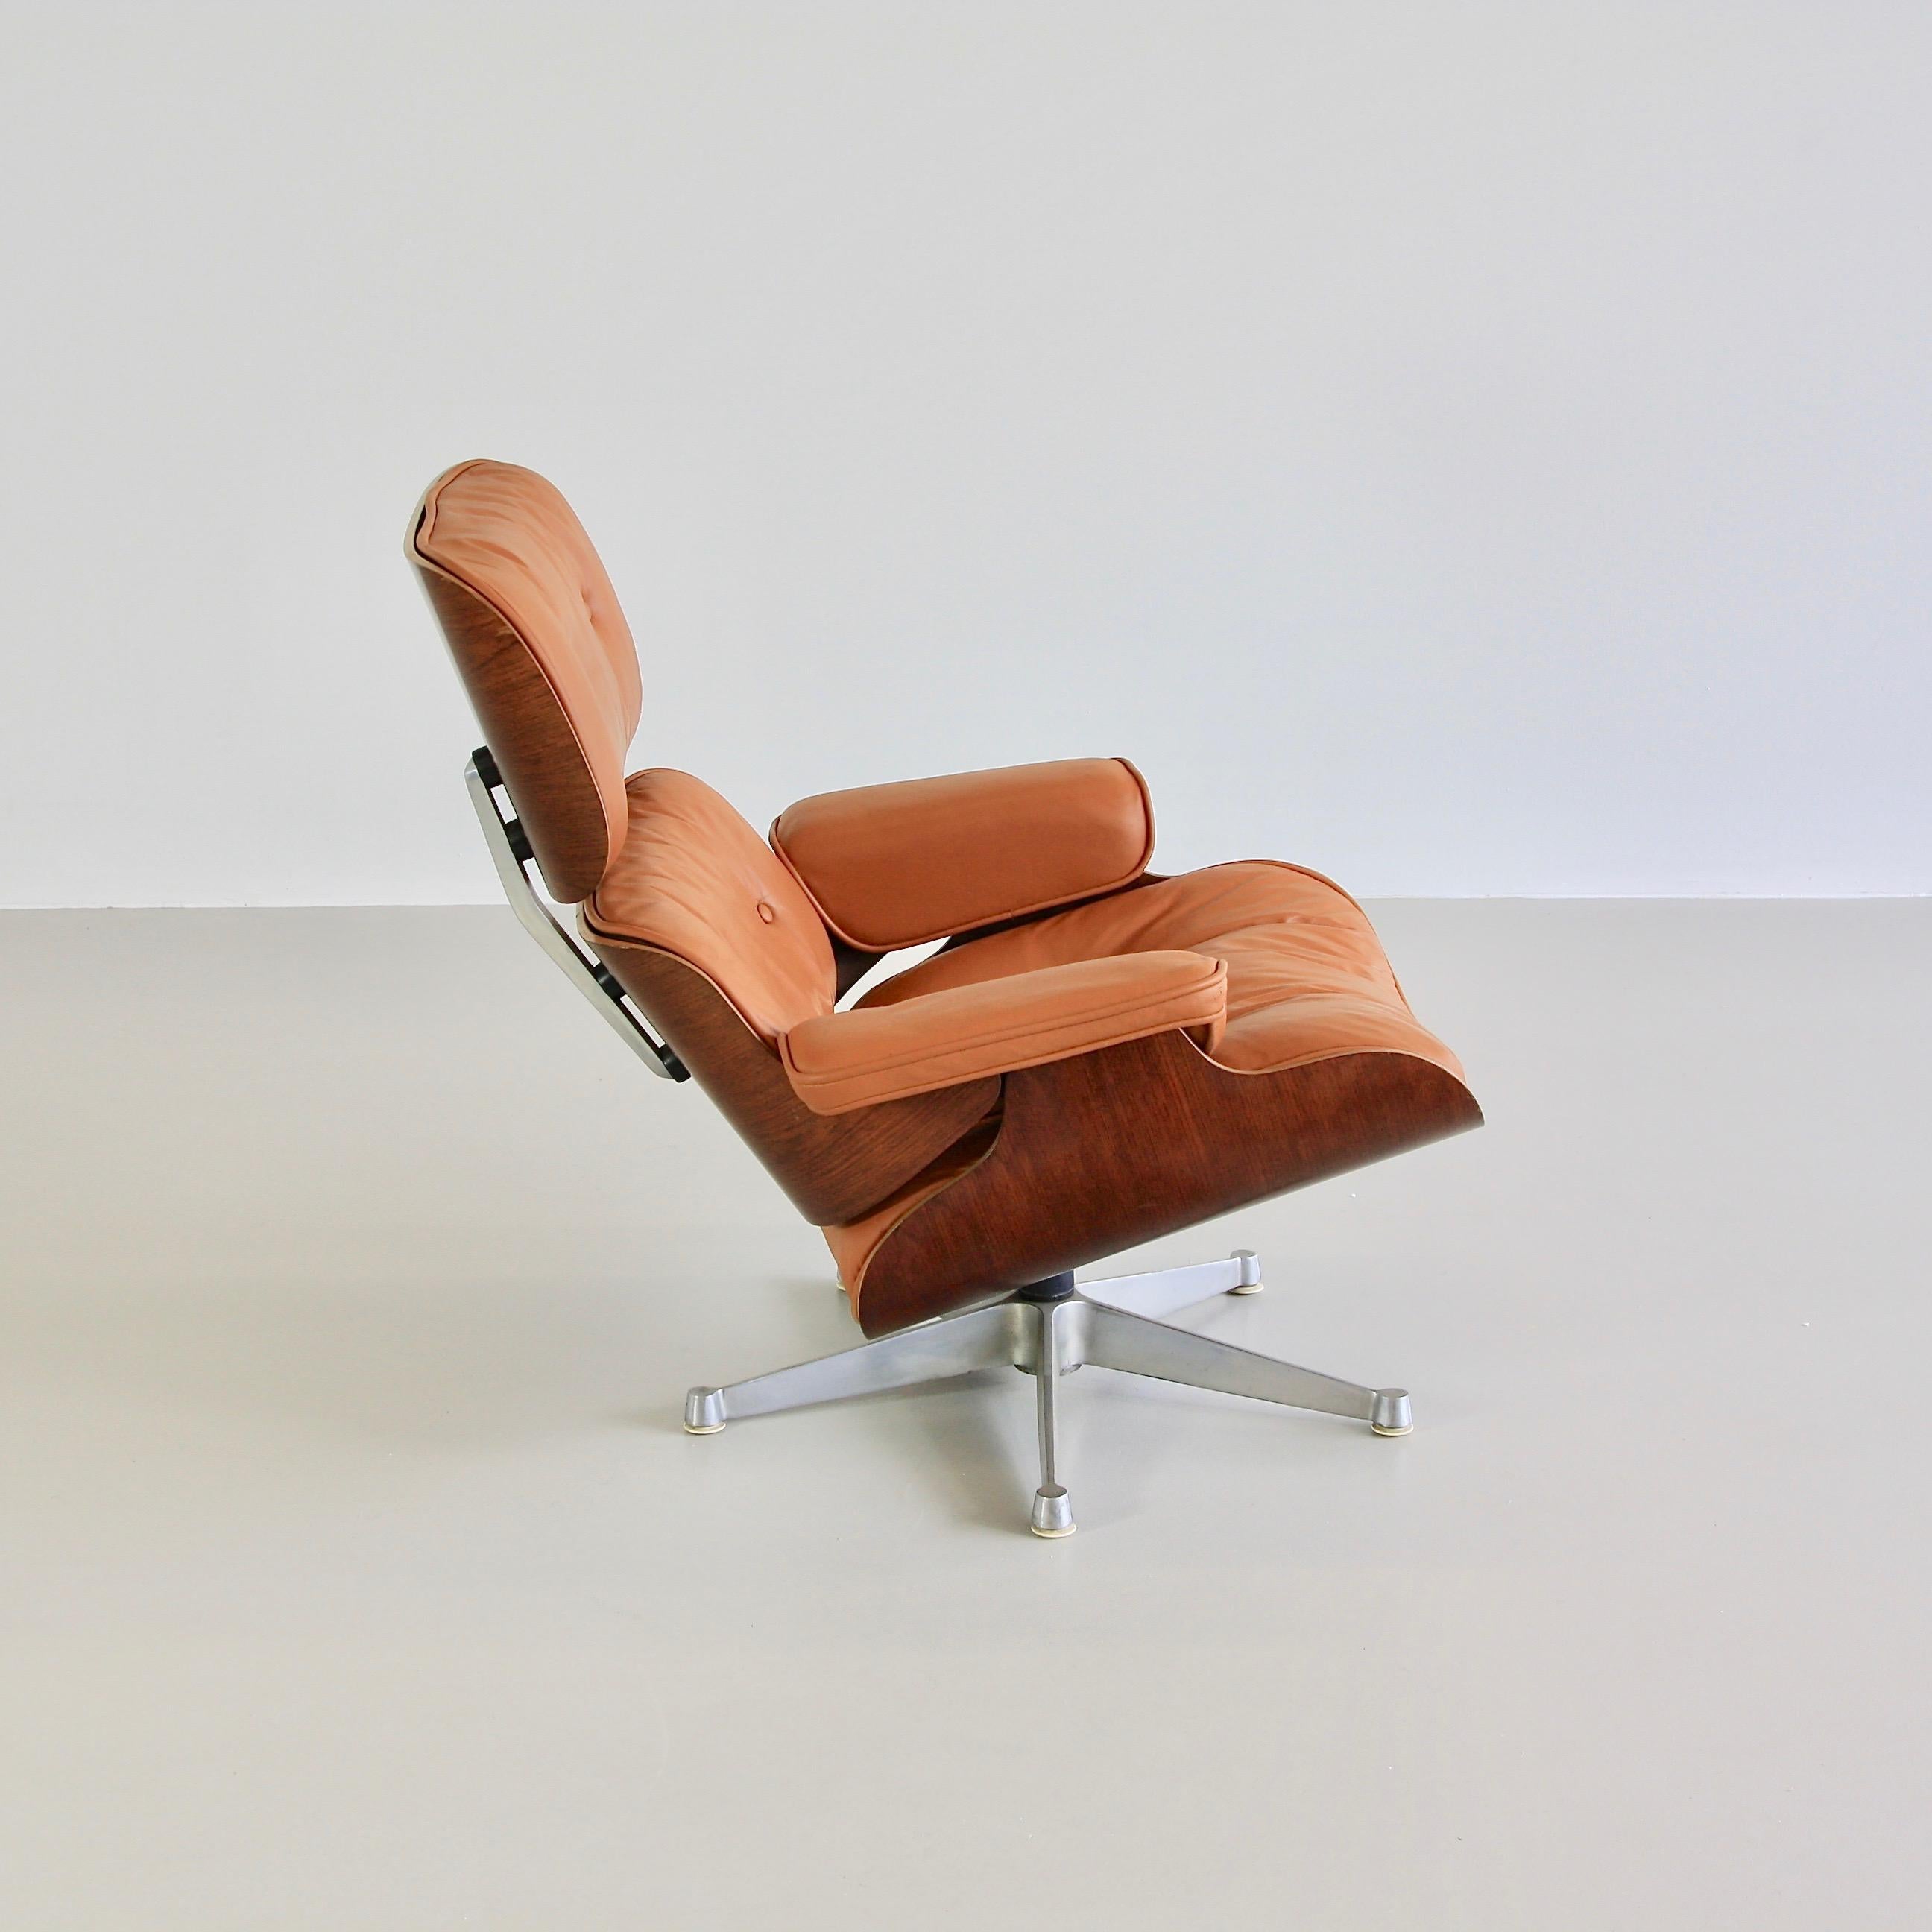 Original lounge chair (Model 670) designed by Ray and Charles Eames. Italy, ICF (Herman Miller), 1960s.

Very early production lounge chair produced under licence from Herman Miller. Plywood shell in rosewood with cognac colored leather which has